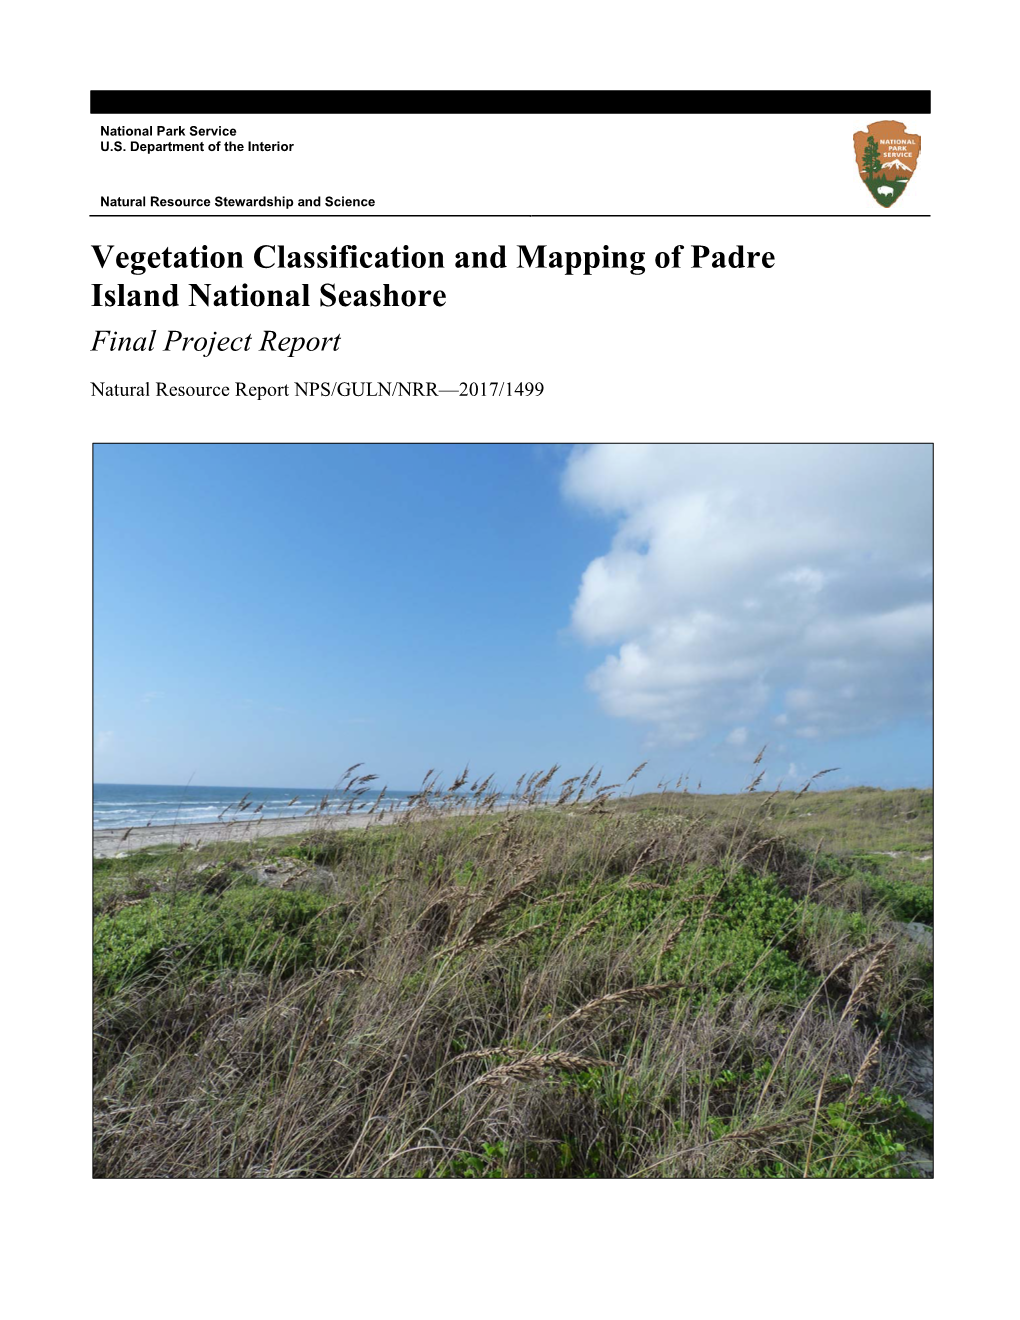 Vegetation Classification and Mapping of Padre Island National Seashore Final Project Report